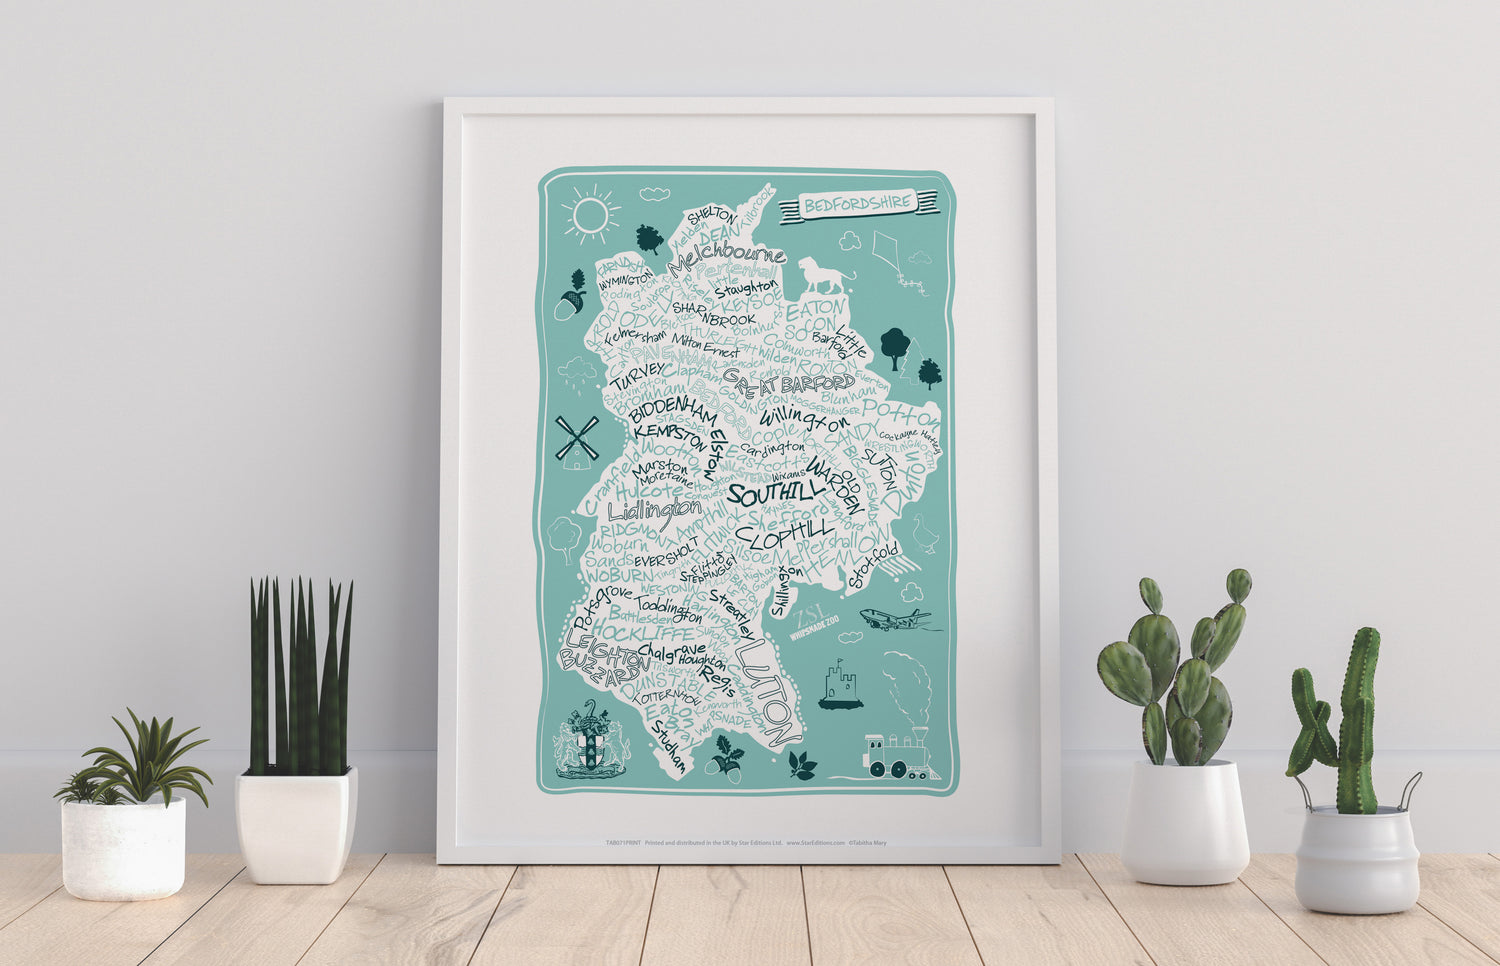 County Map of Bedfordshire, - Art Print